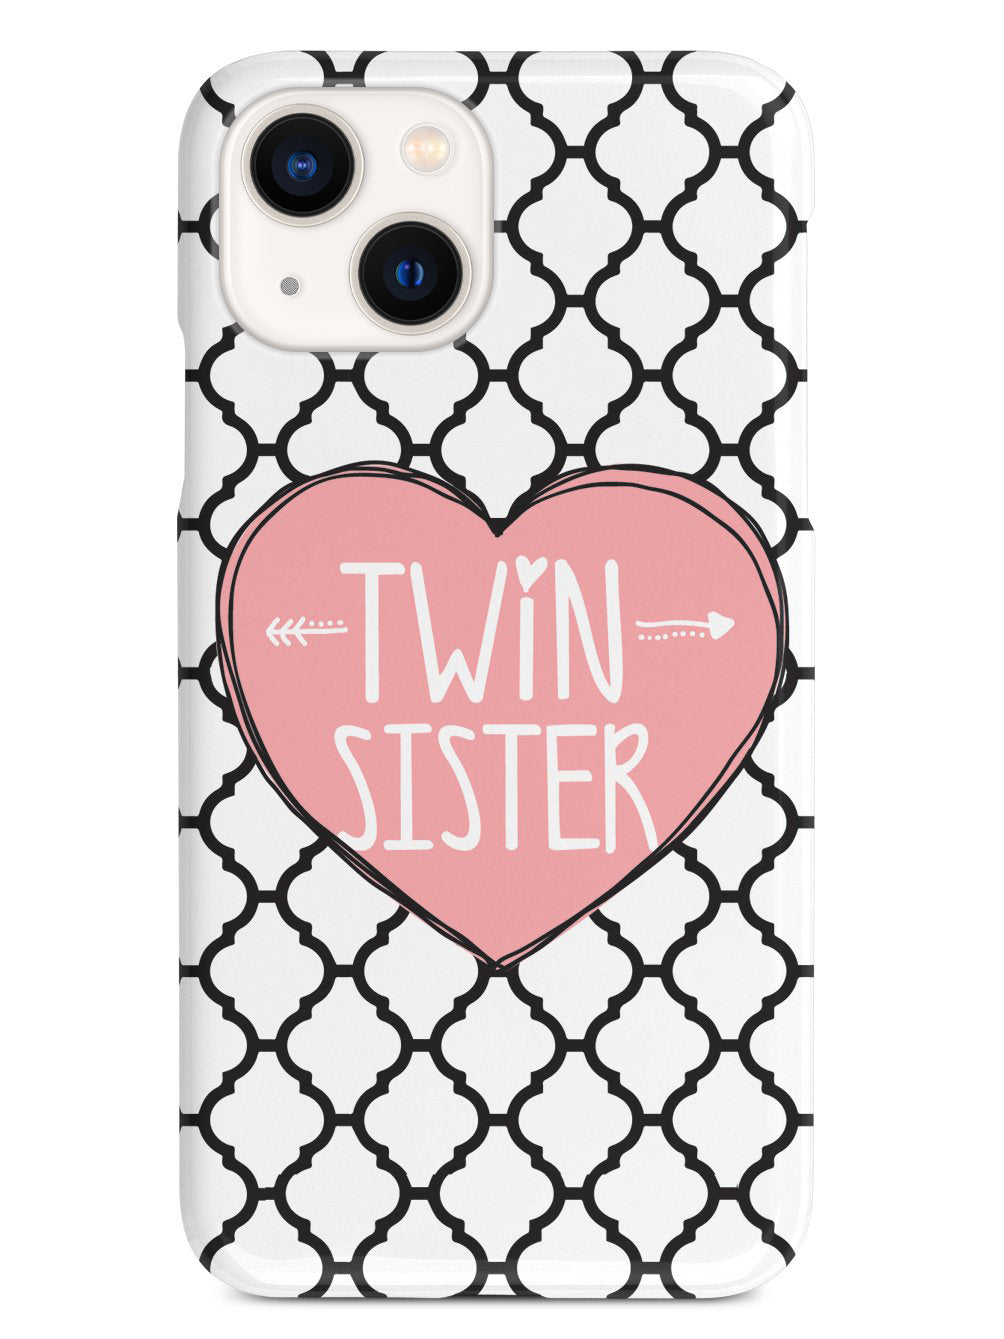 Sisterly Love - Twin Sister - Moroccan Case